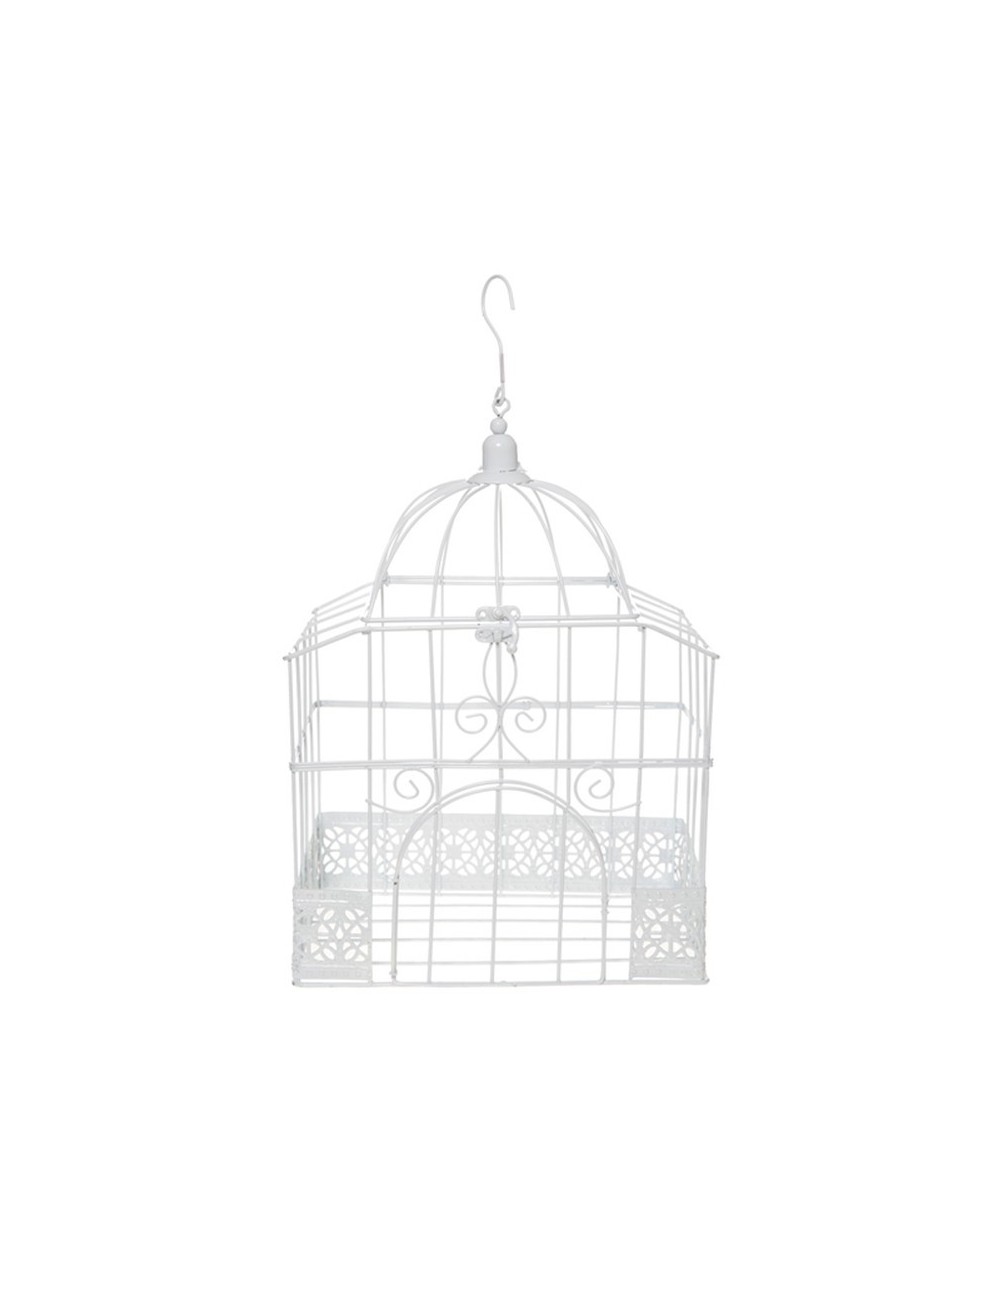 Cage rectangulaire blanche